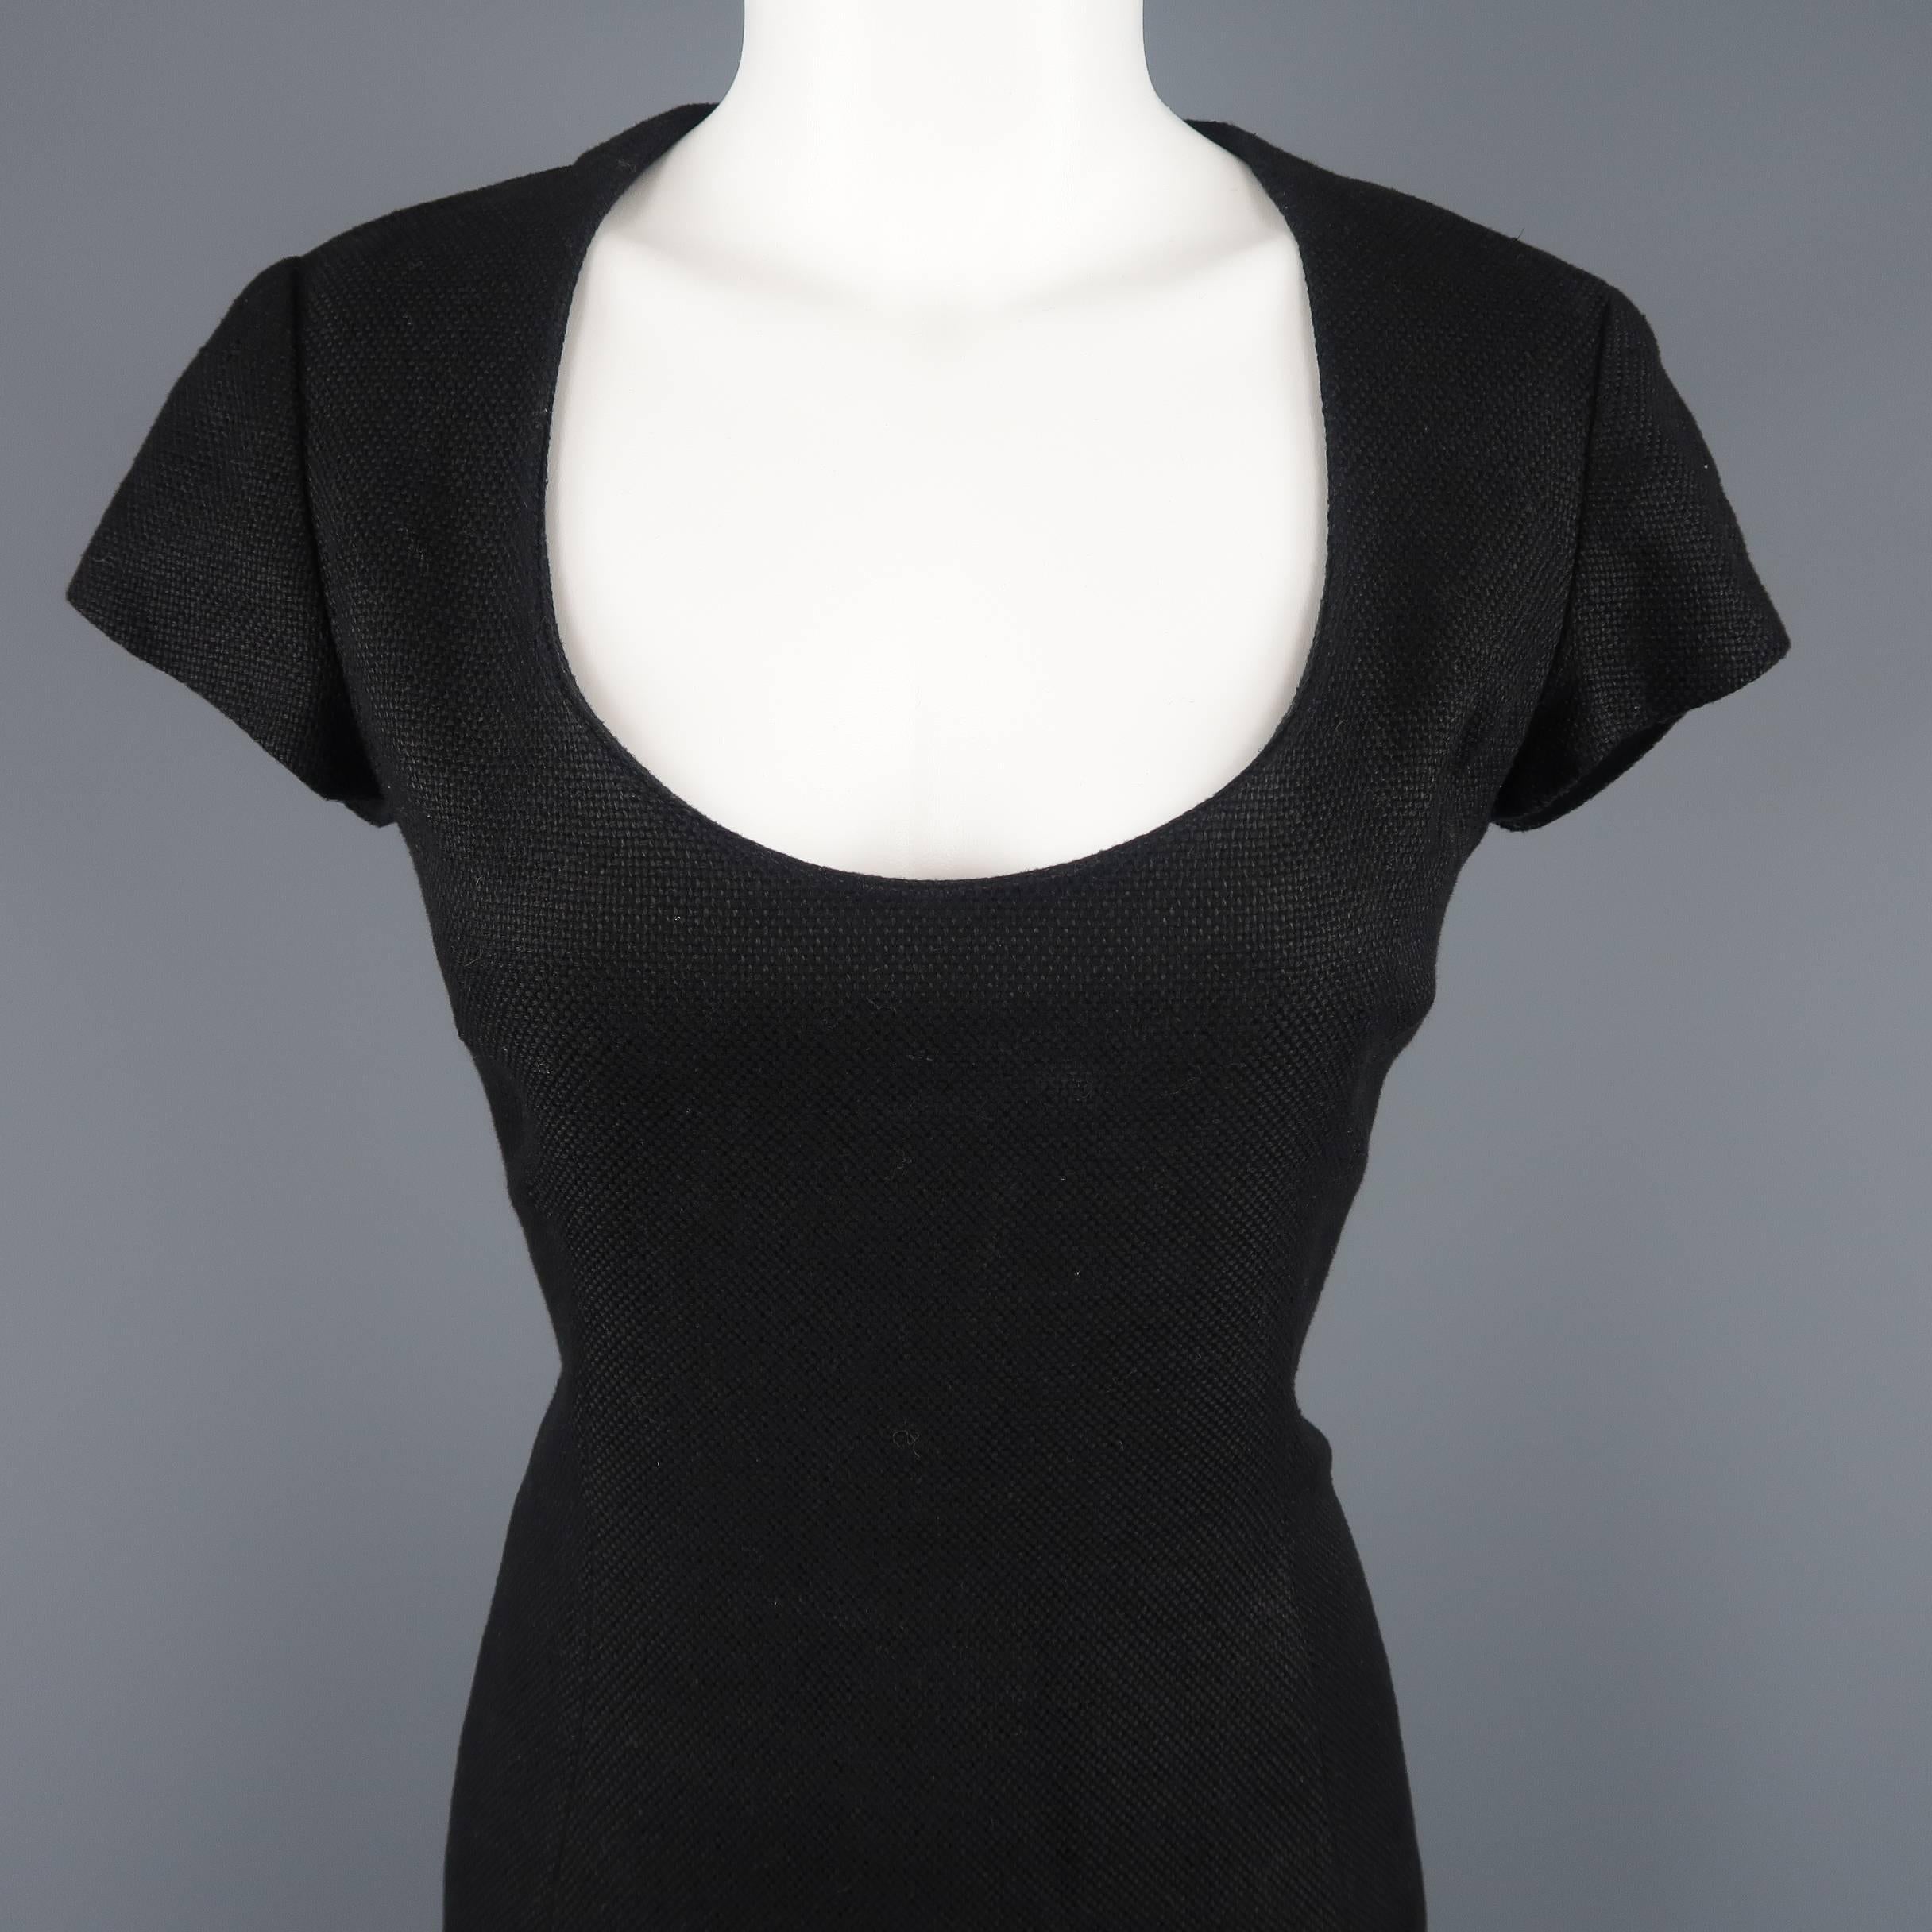 RALPH LAUREN COLLECTION dress comes in black woven linen fabric with a scoop neck, cap sleeves, and sheath silhouette. Made in USA.
 
Good Pre-Owned Condition.
Marked: 8
 
Measurements:
 
Shoulder: 15 in.
Bust: 36 in.
Waist: 32 in.
Hip: 40